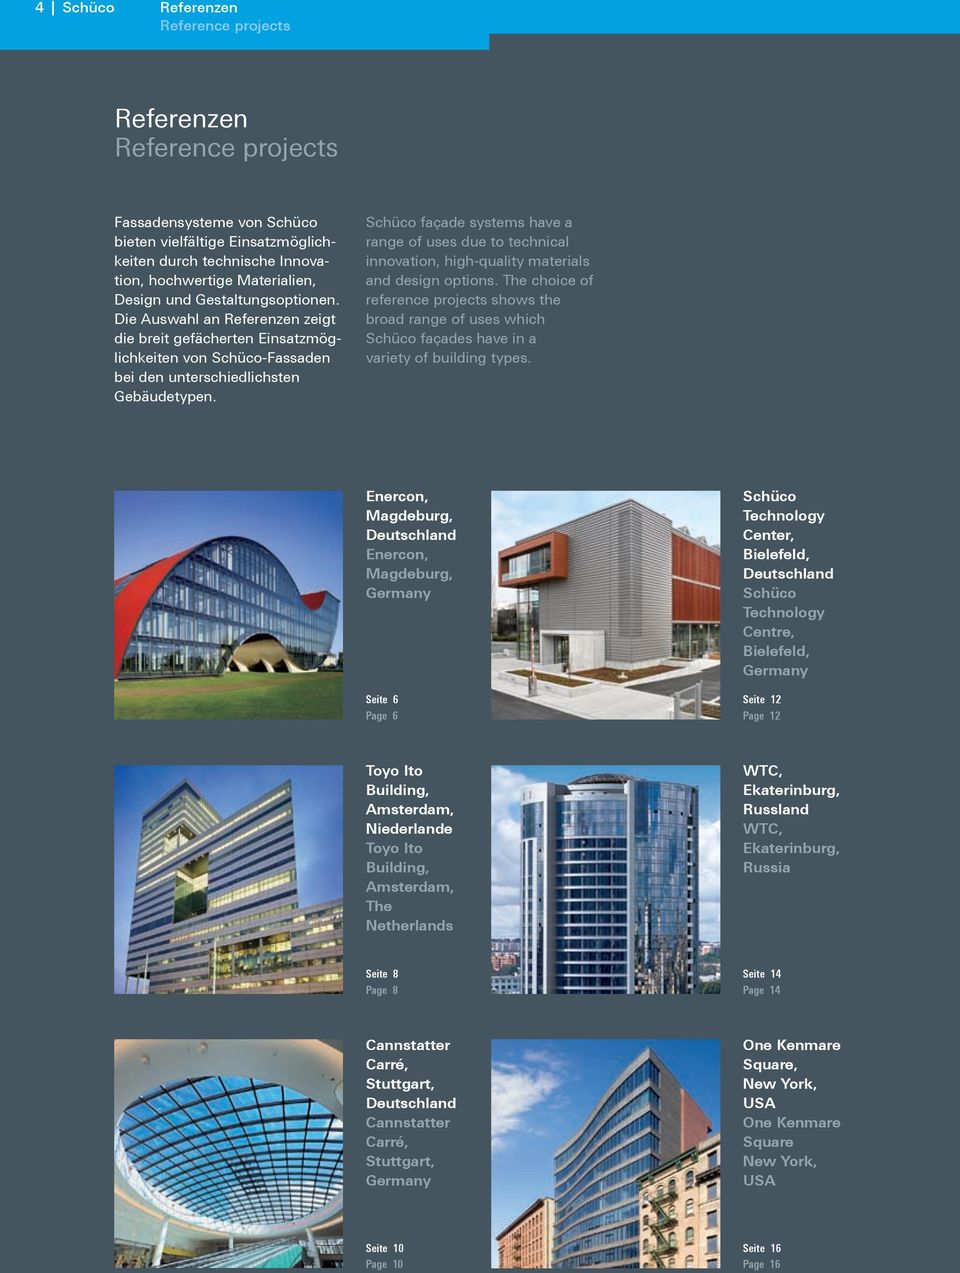 Schüco façade systems have a range of uses due to technical innovation, high-quality materials and design options.